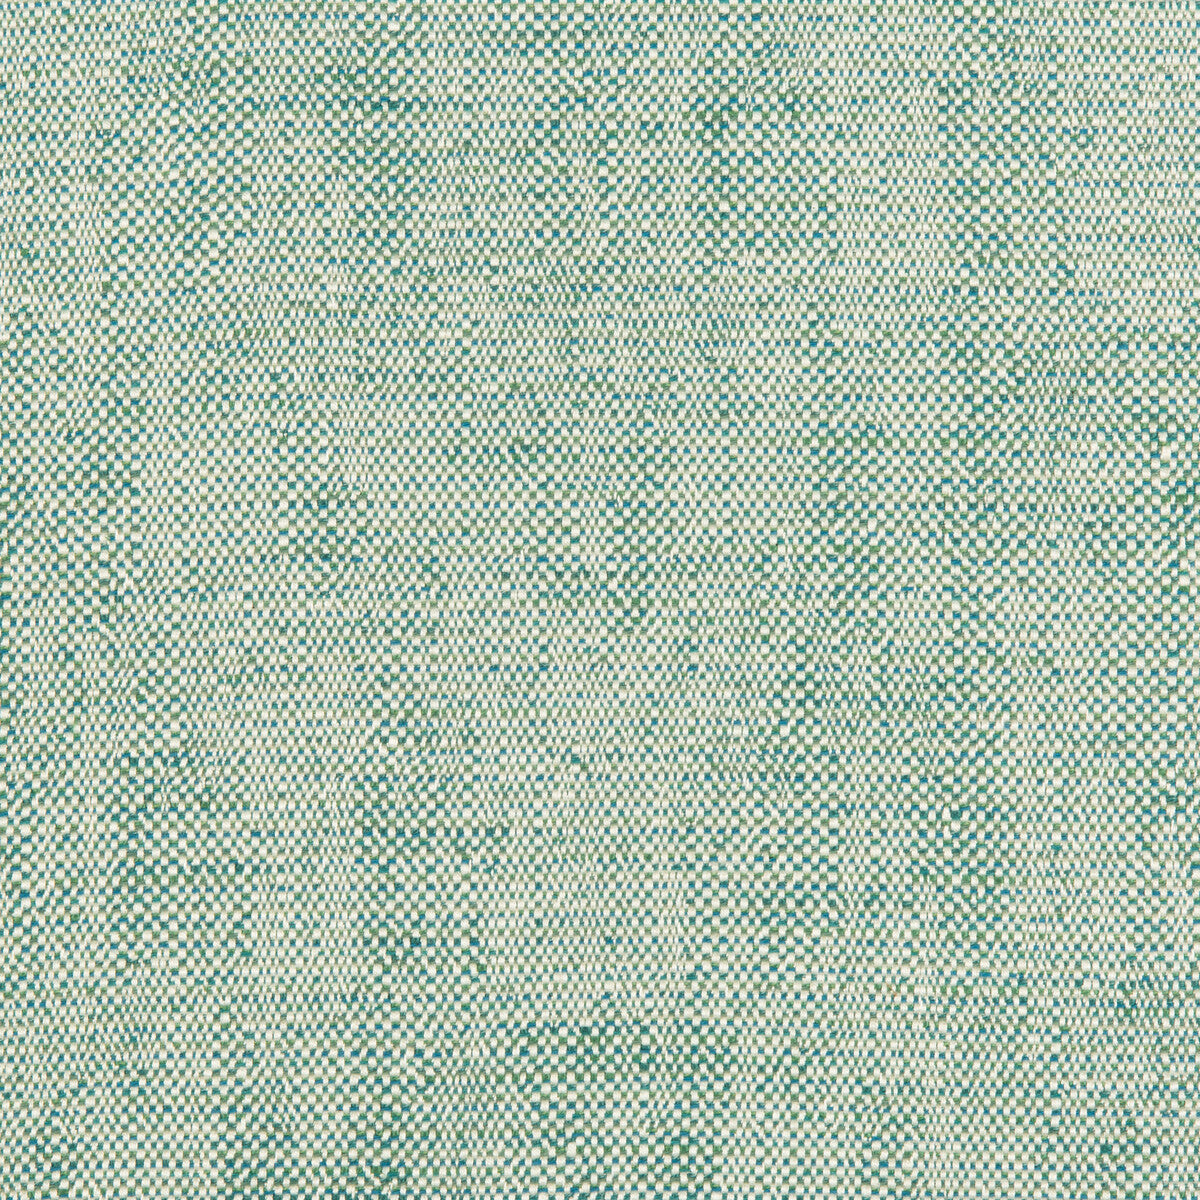 Kravet Design fabric in 35135-13 color - pattern 35135.13.0 - by Kravet Design in the Performance Crypton Home collection